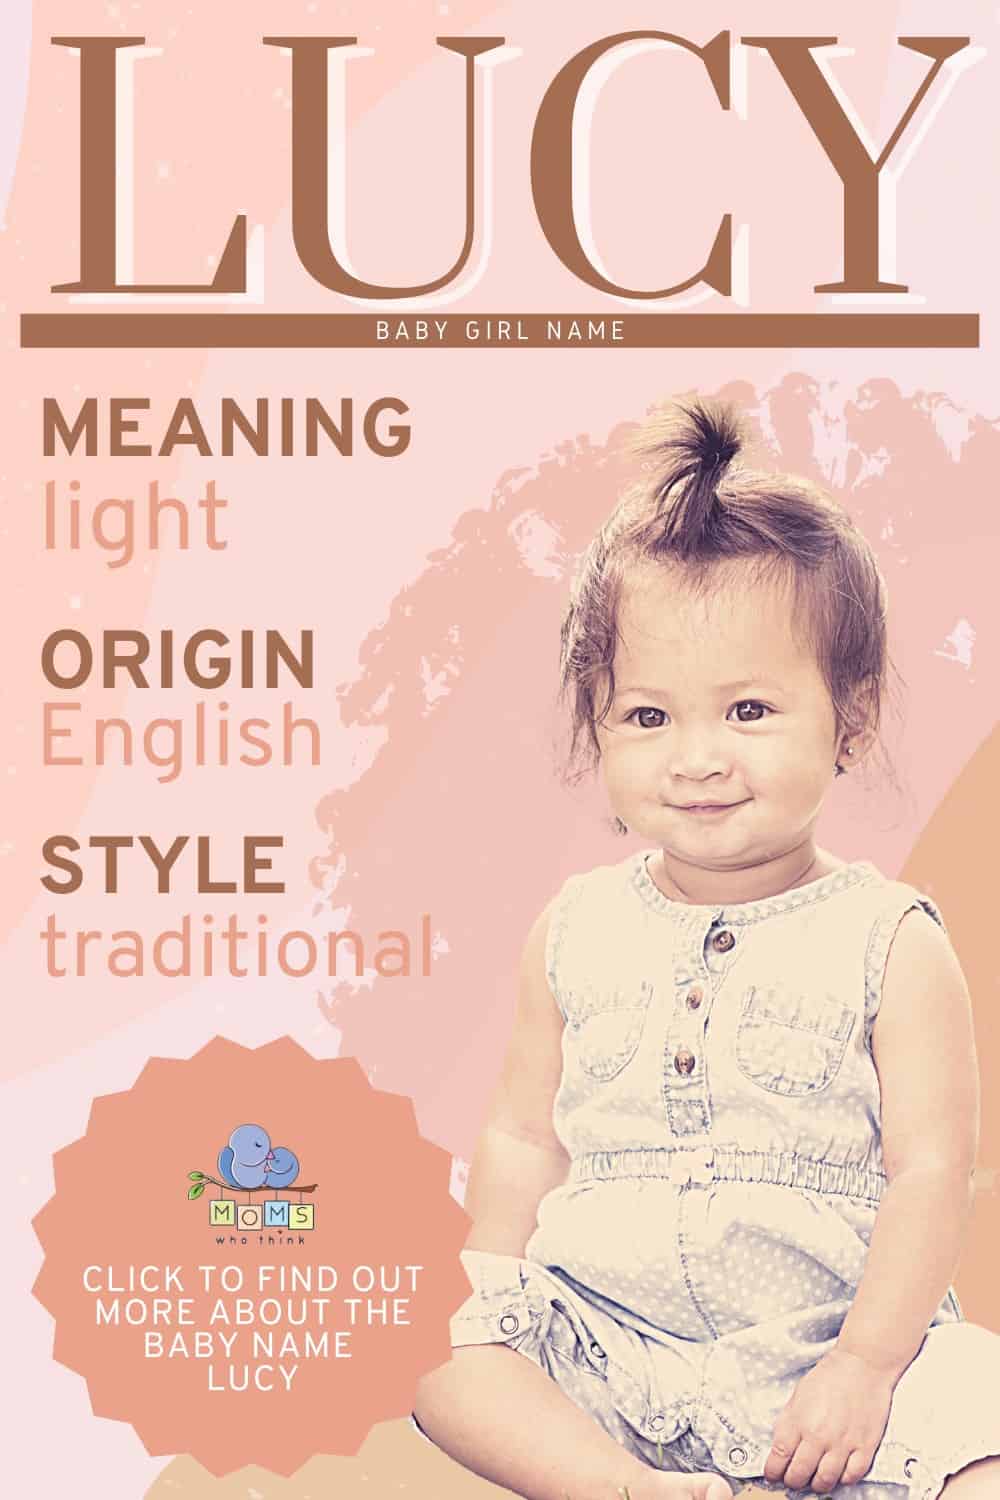 Baby name Lucy